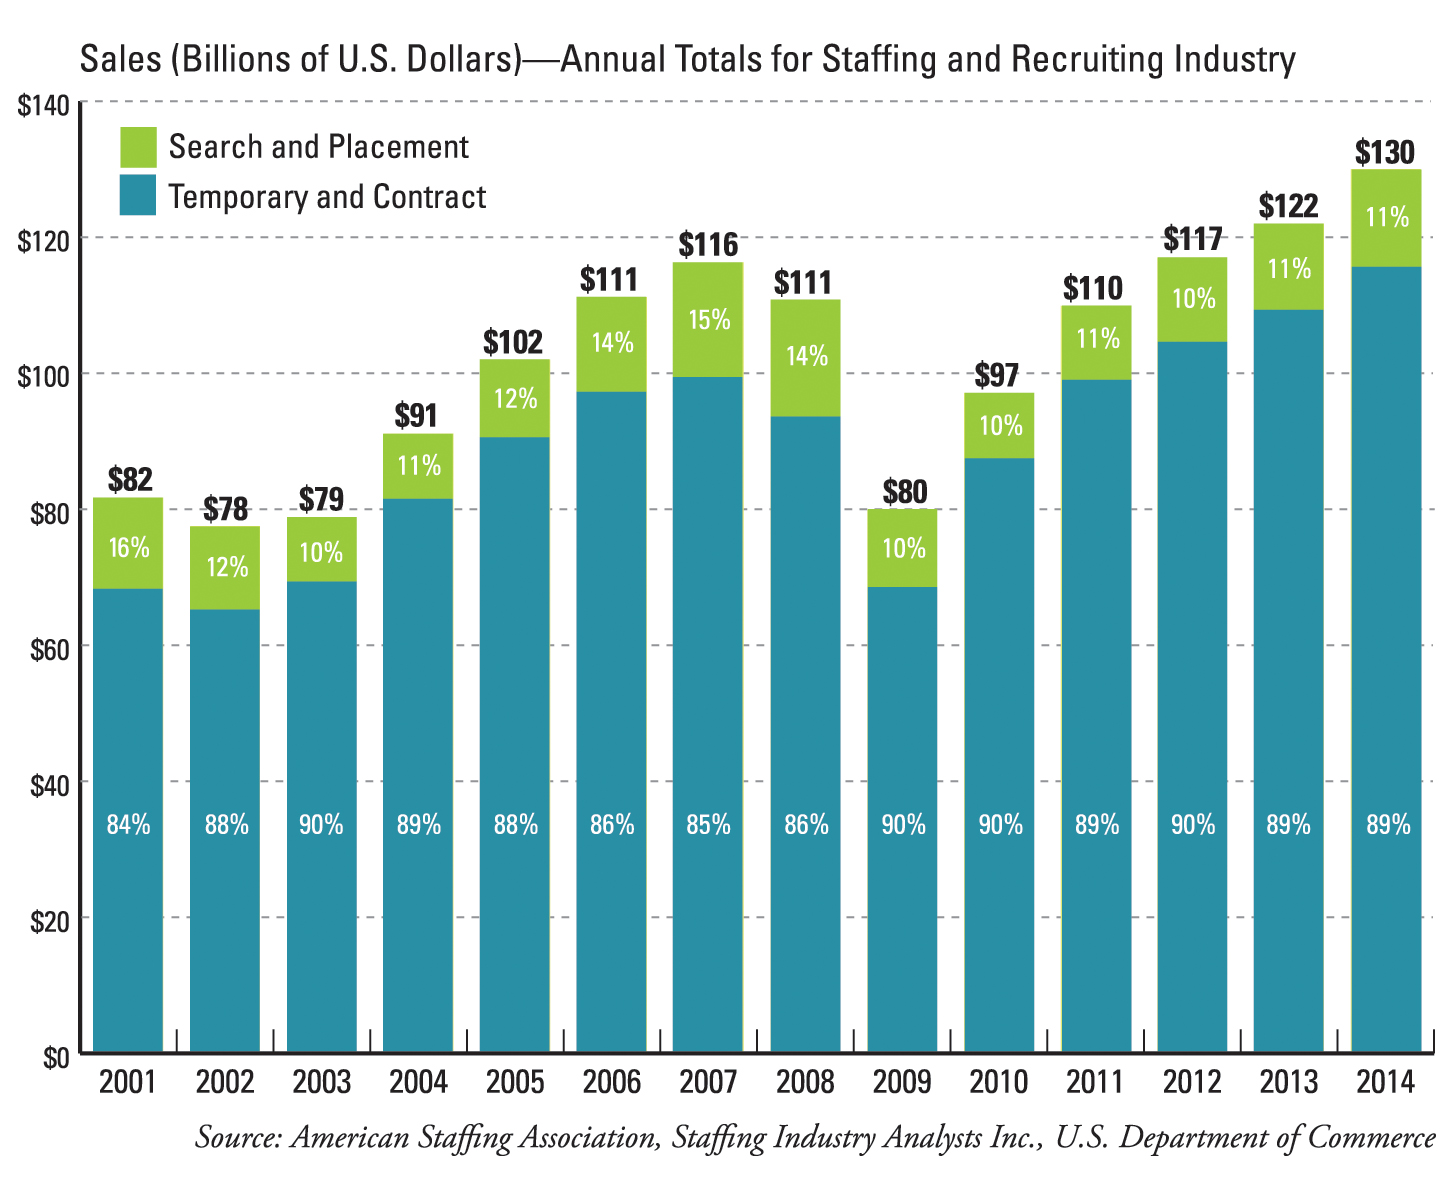 Annual Sales Totals for the Staffing and Recruiting industry